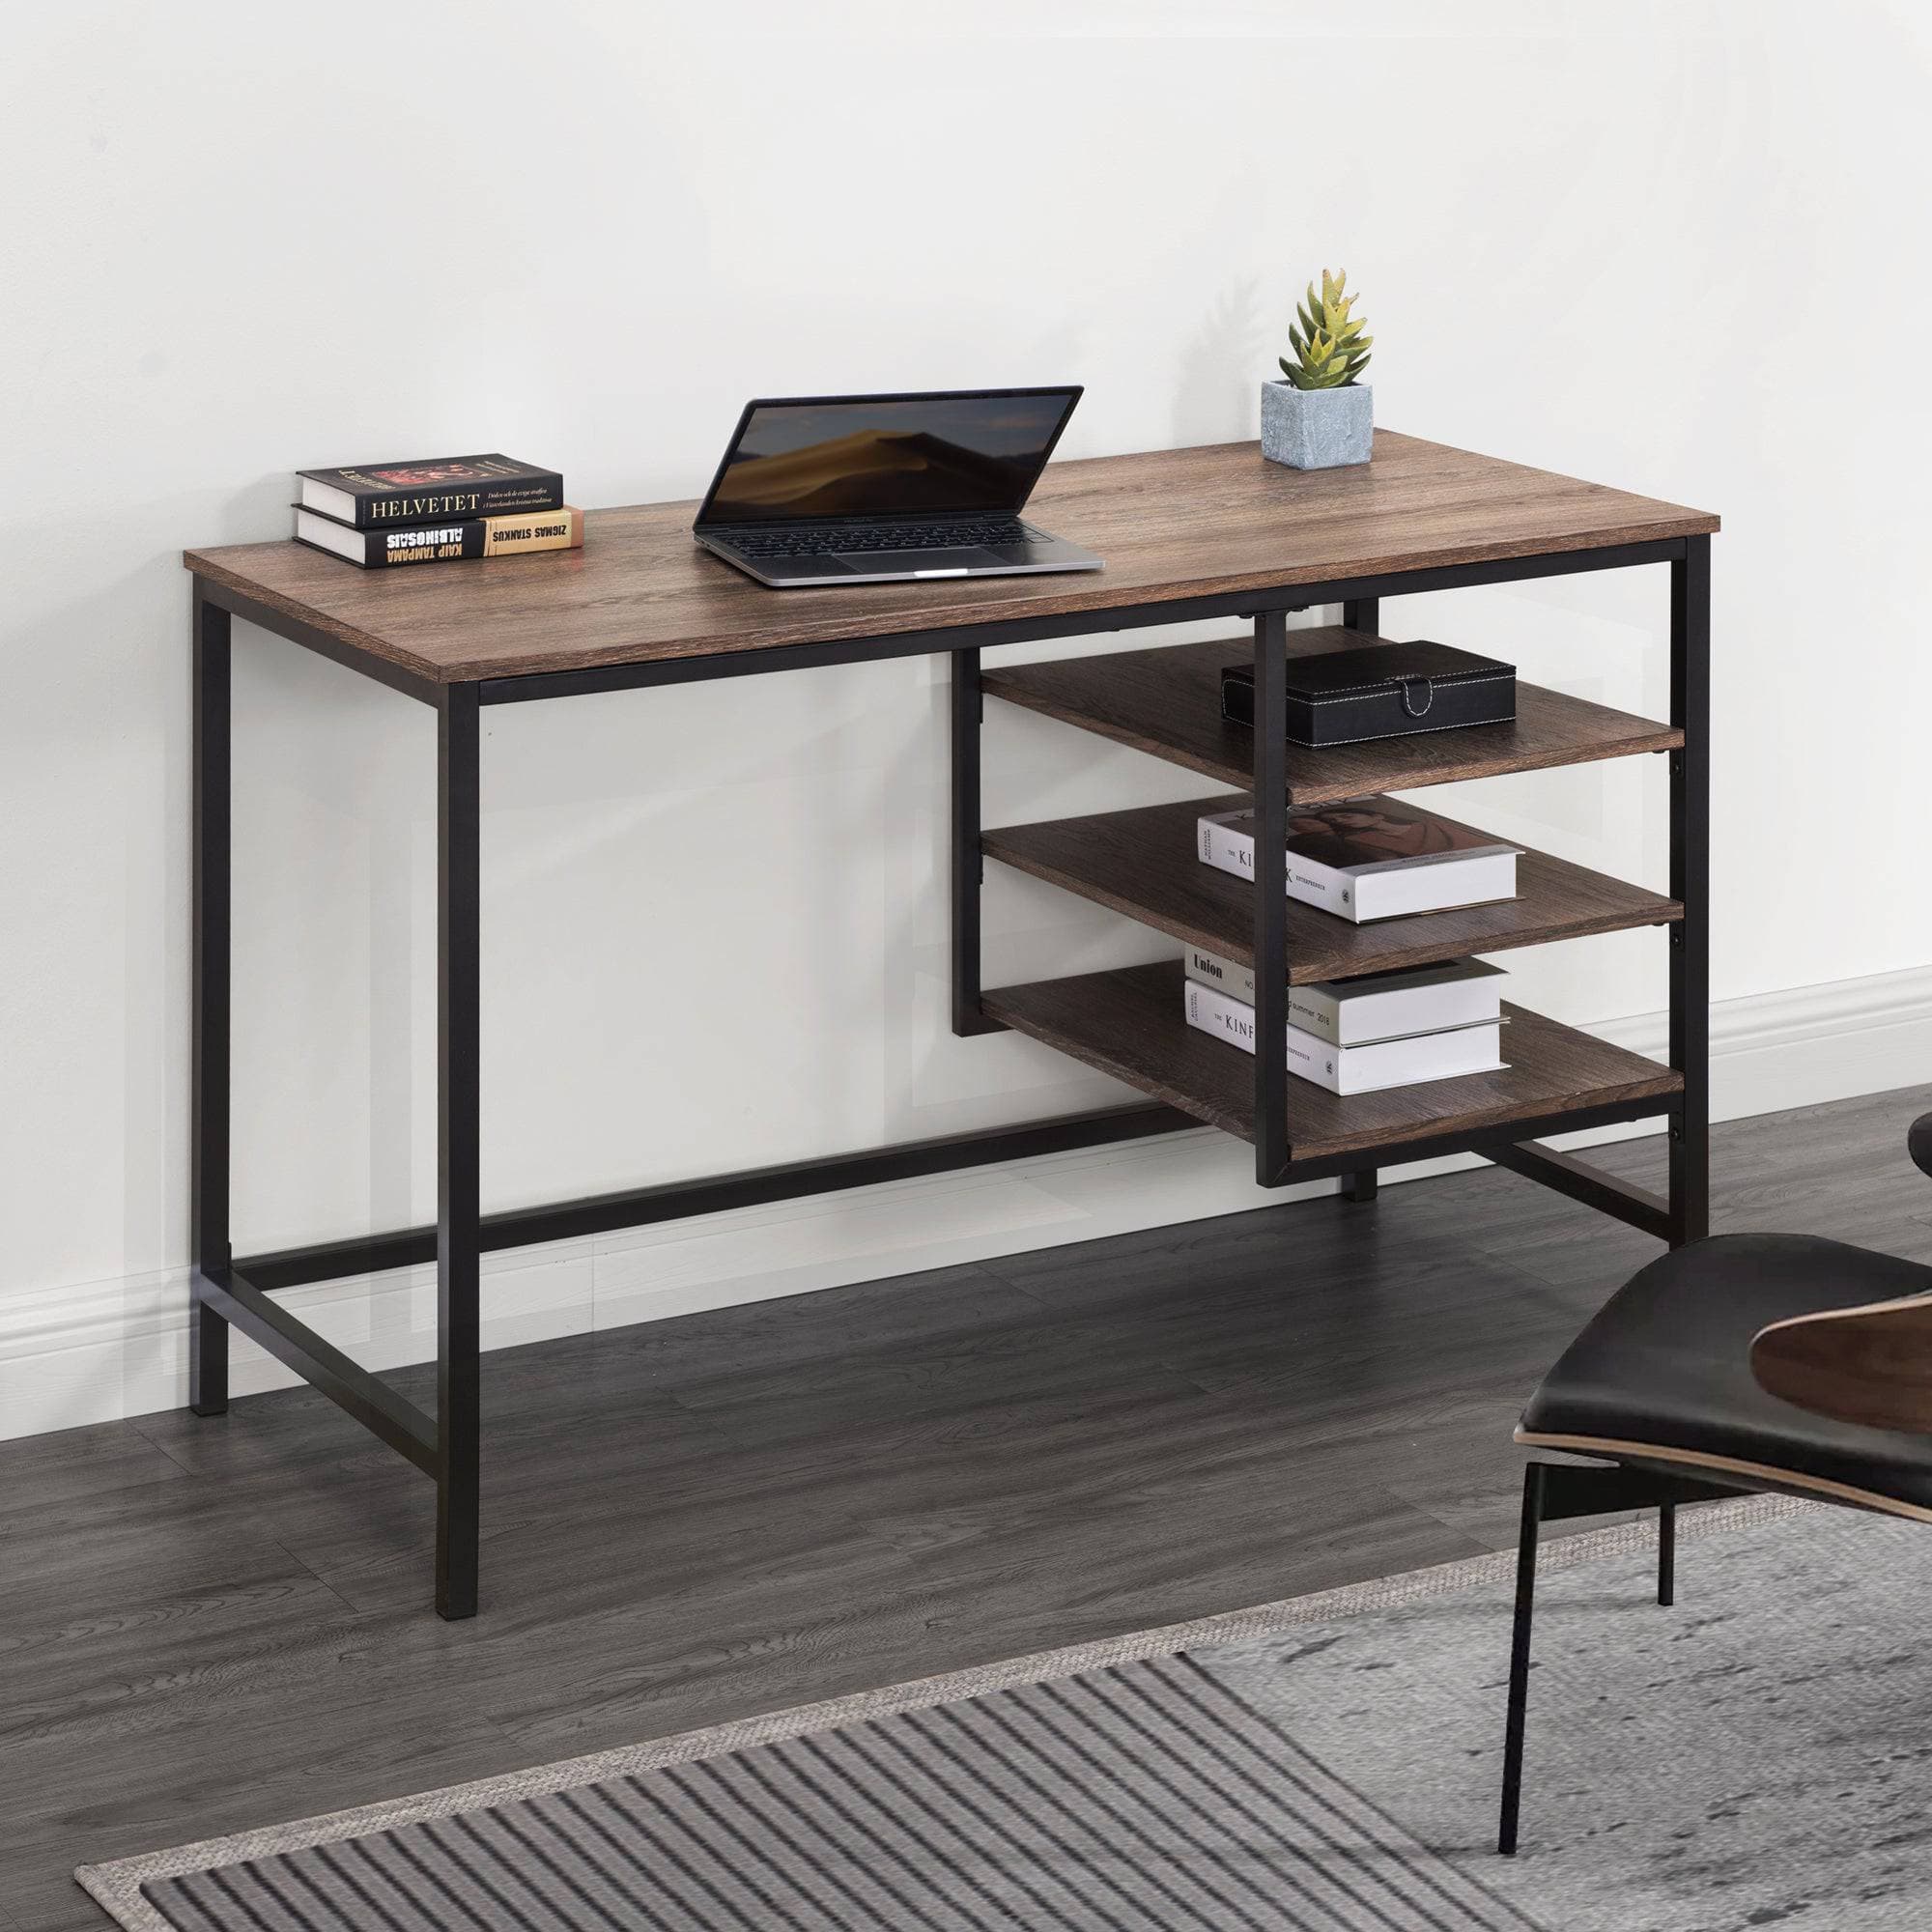 Studio Space 47" Industrial Design Home Office Computer Desk Work Station with Wood Table Top, Black Steel Frame and Shelves.